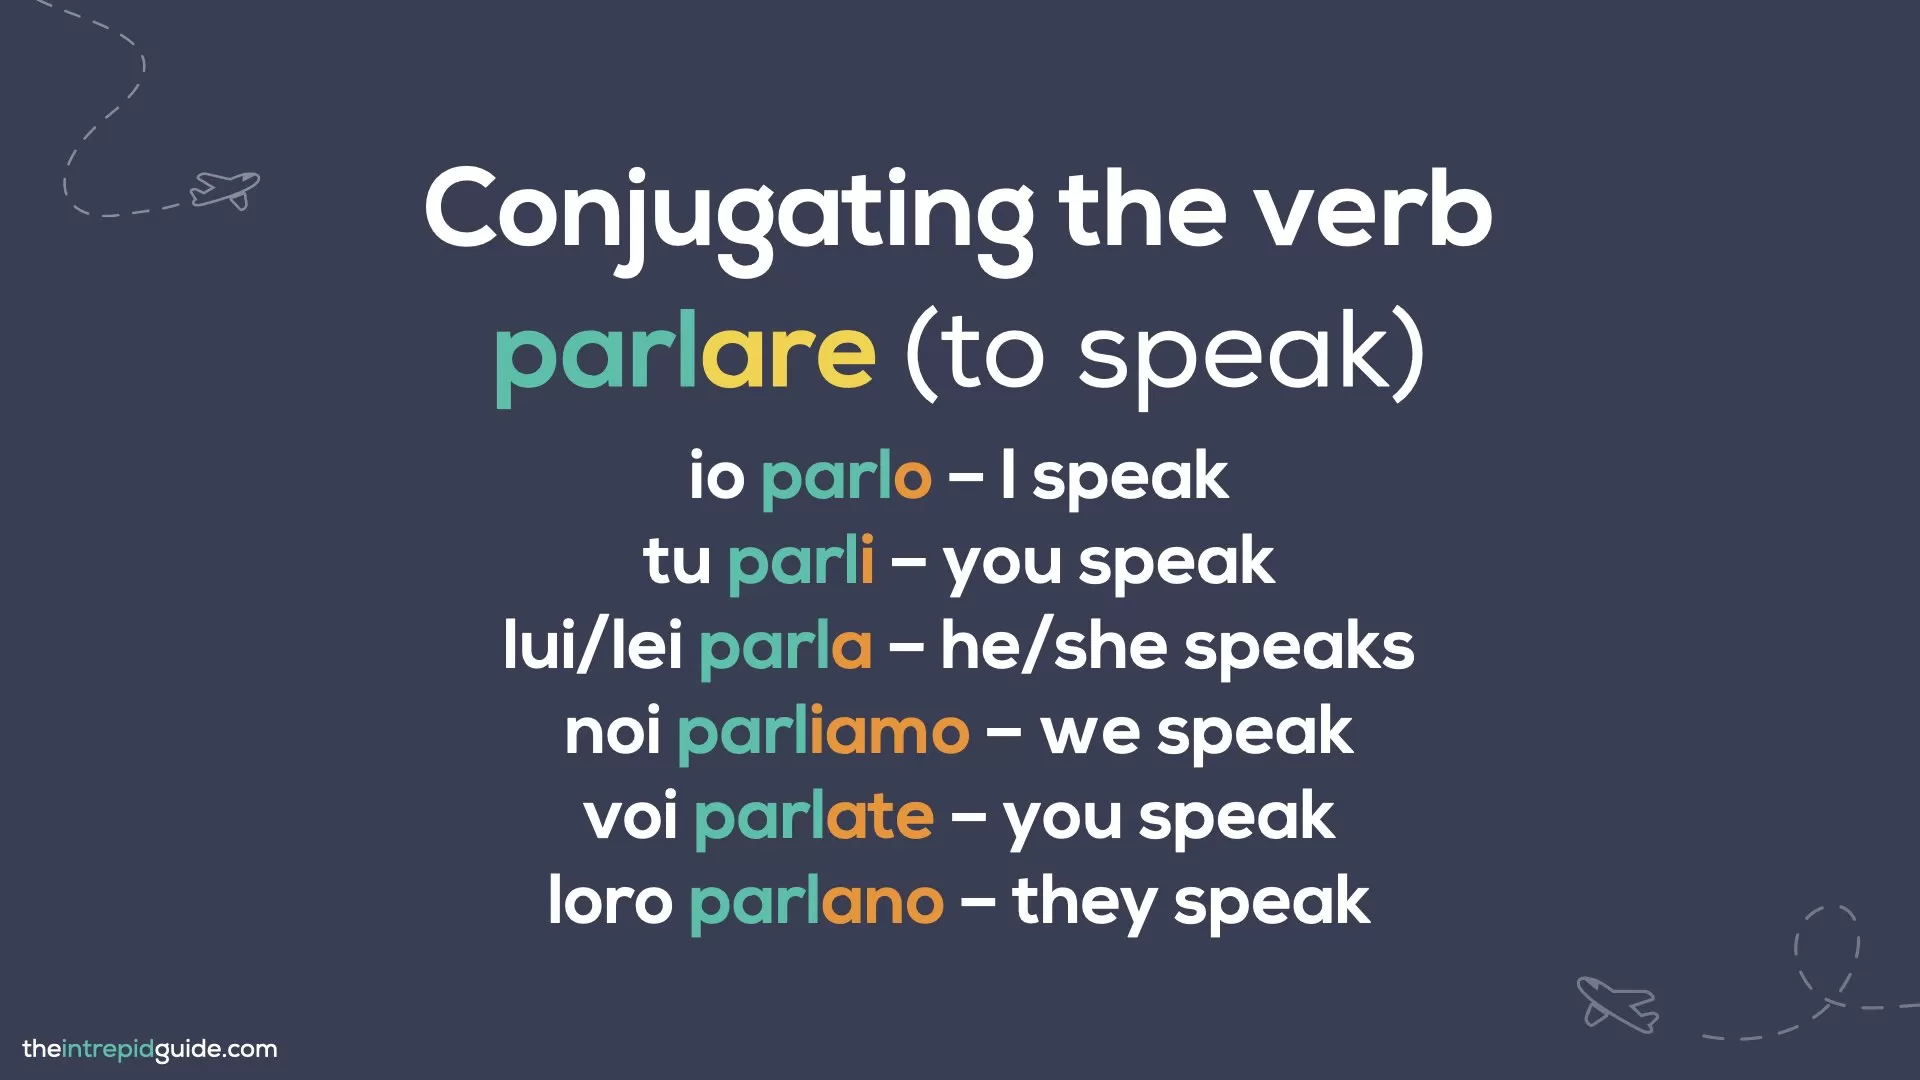 How to Conjugate Italian Verbs - Conjugating the verb parlare - to speak